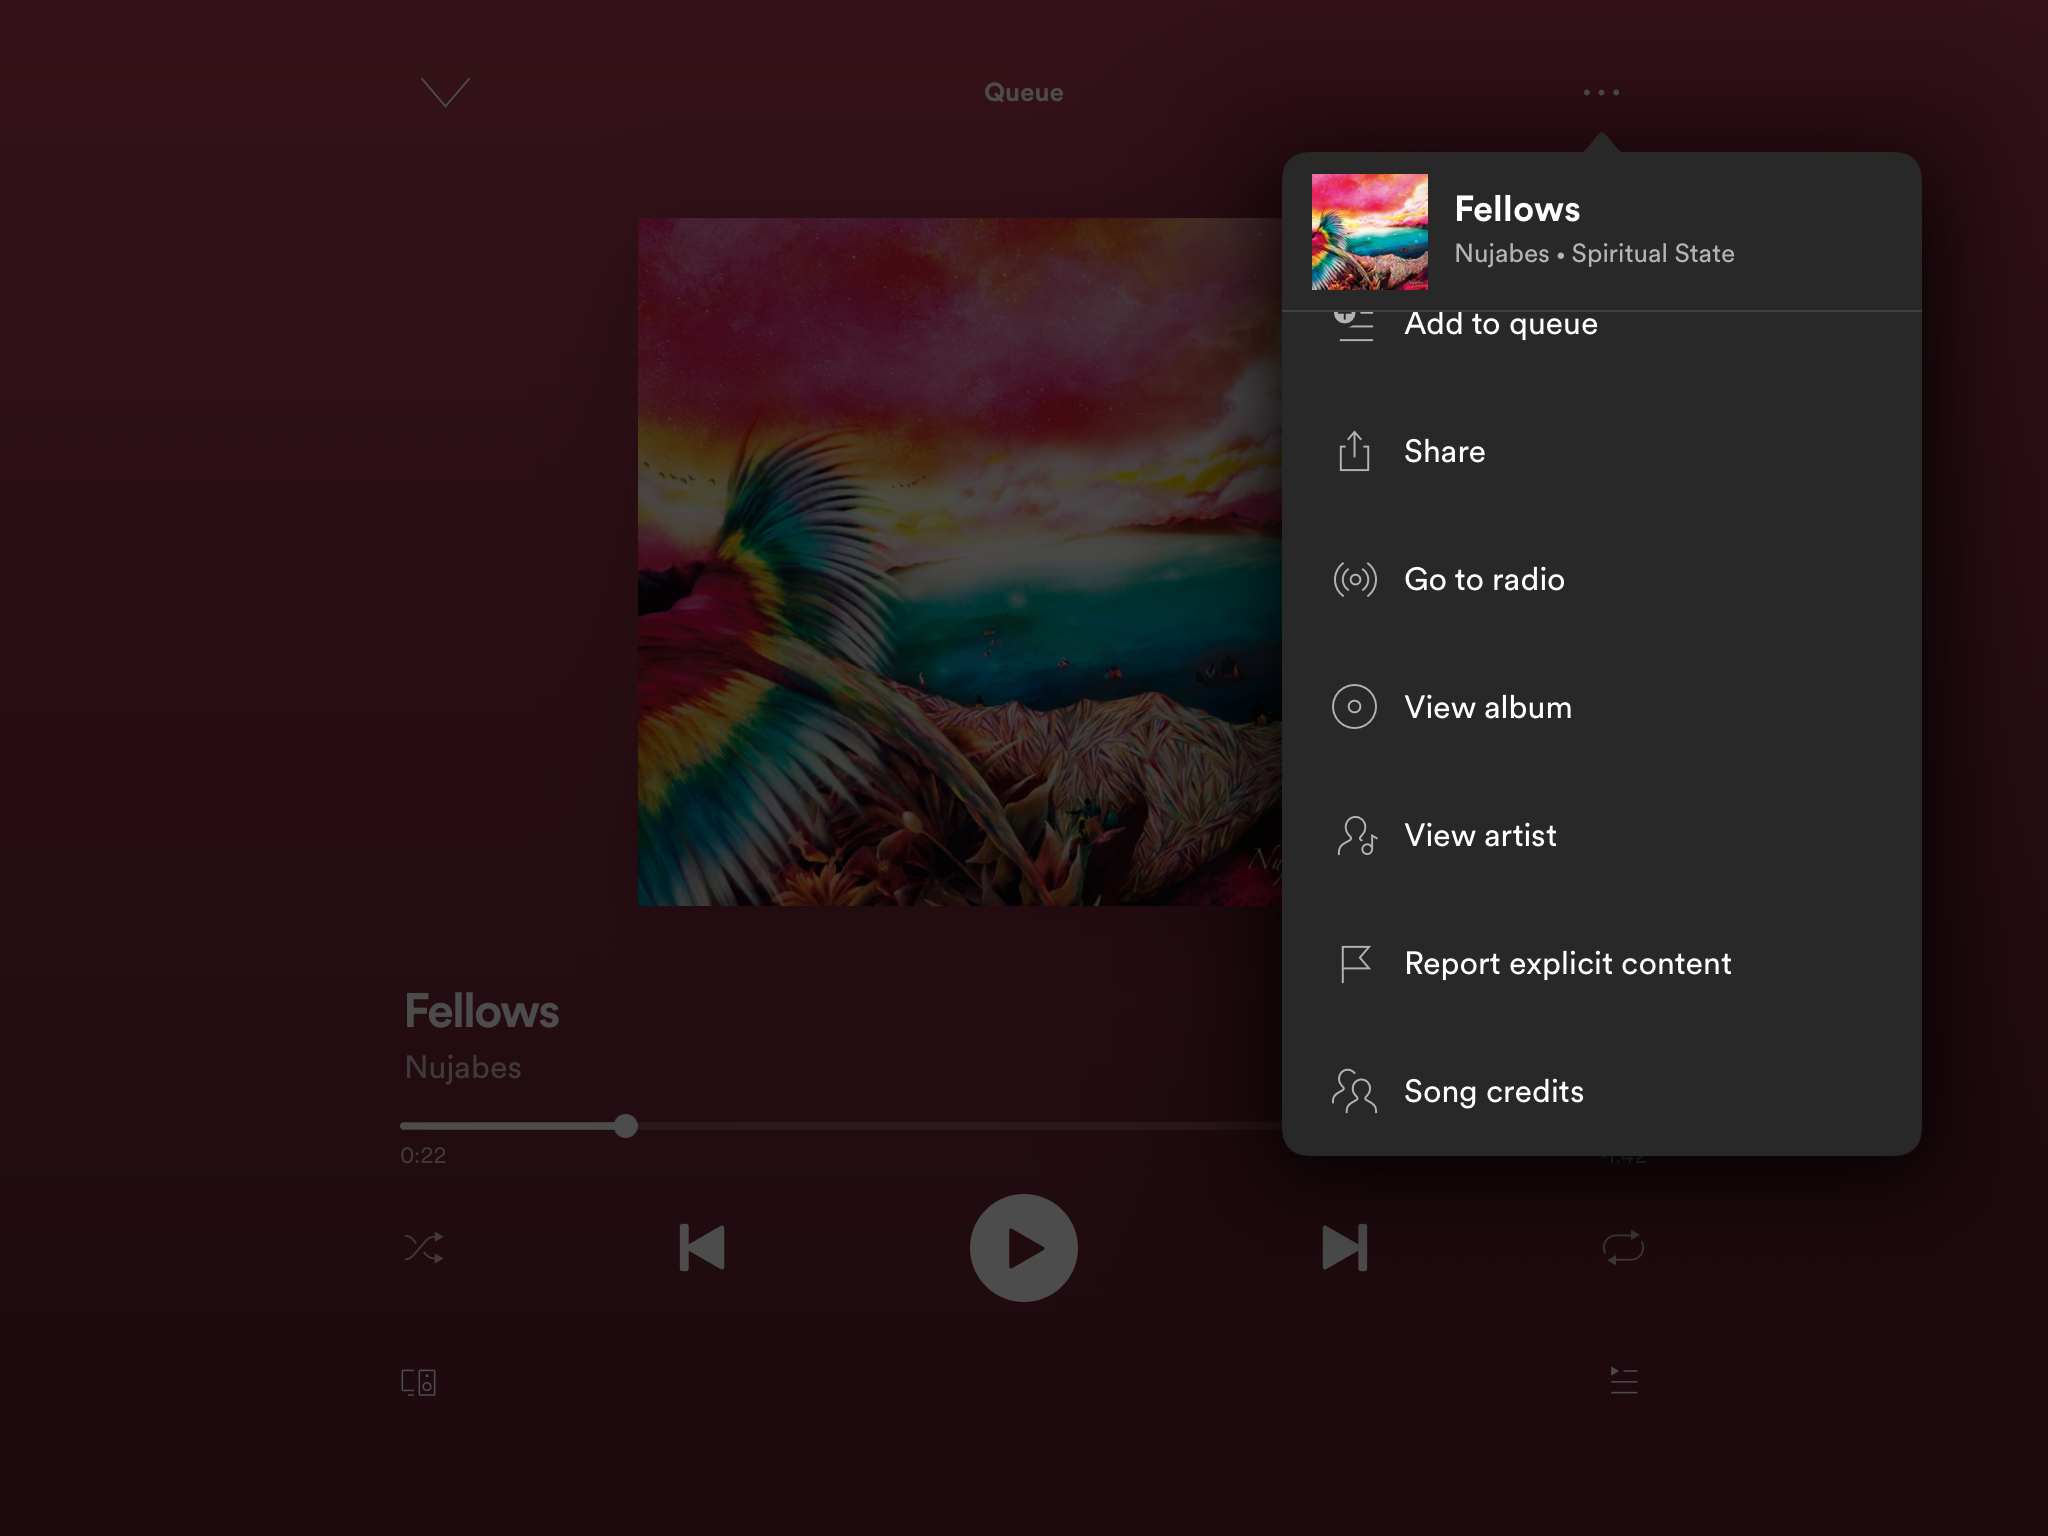 Sleep timer not appearing - Spotify